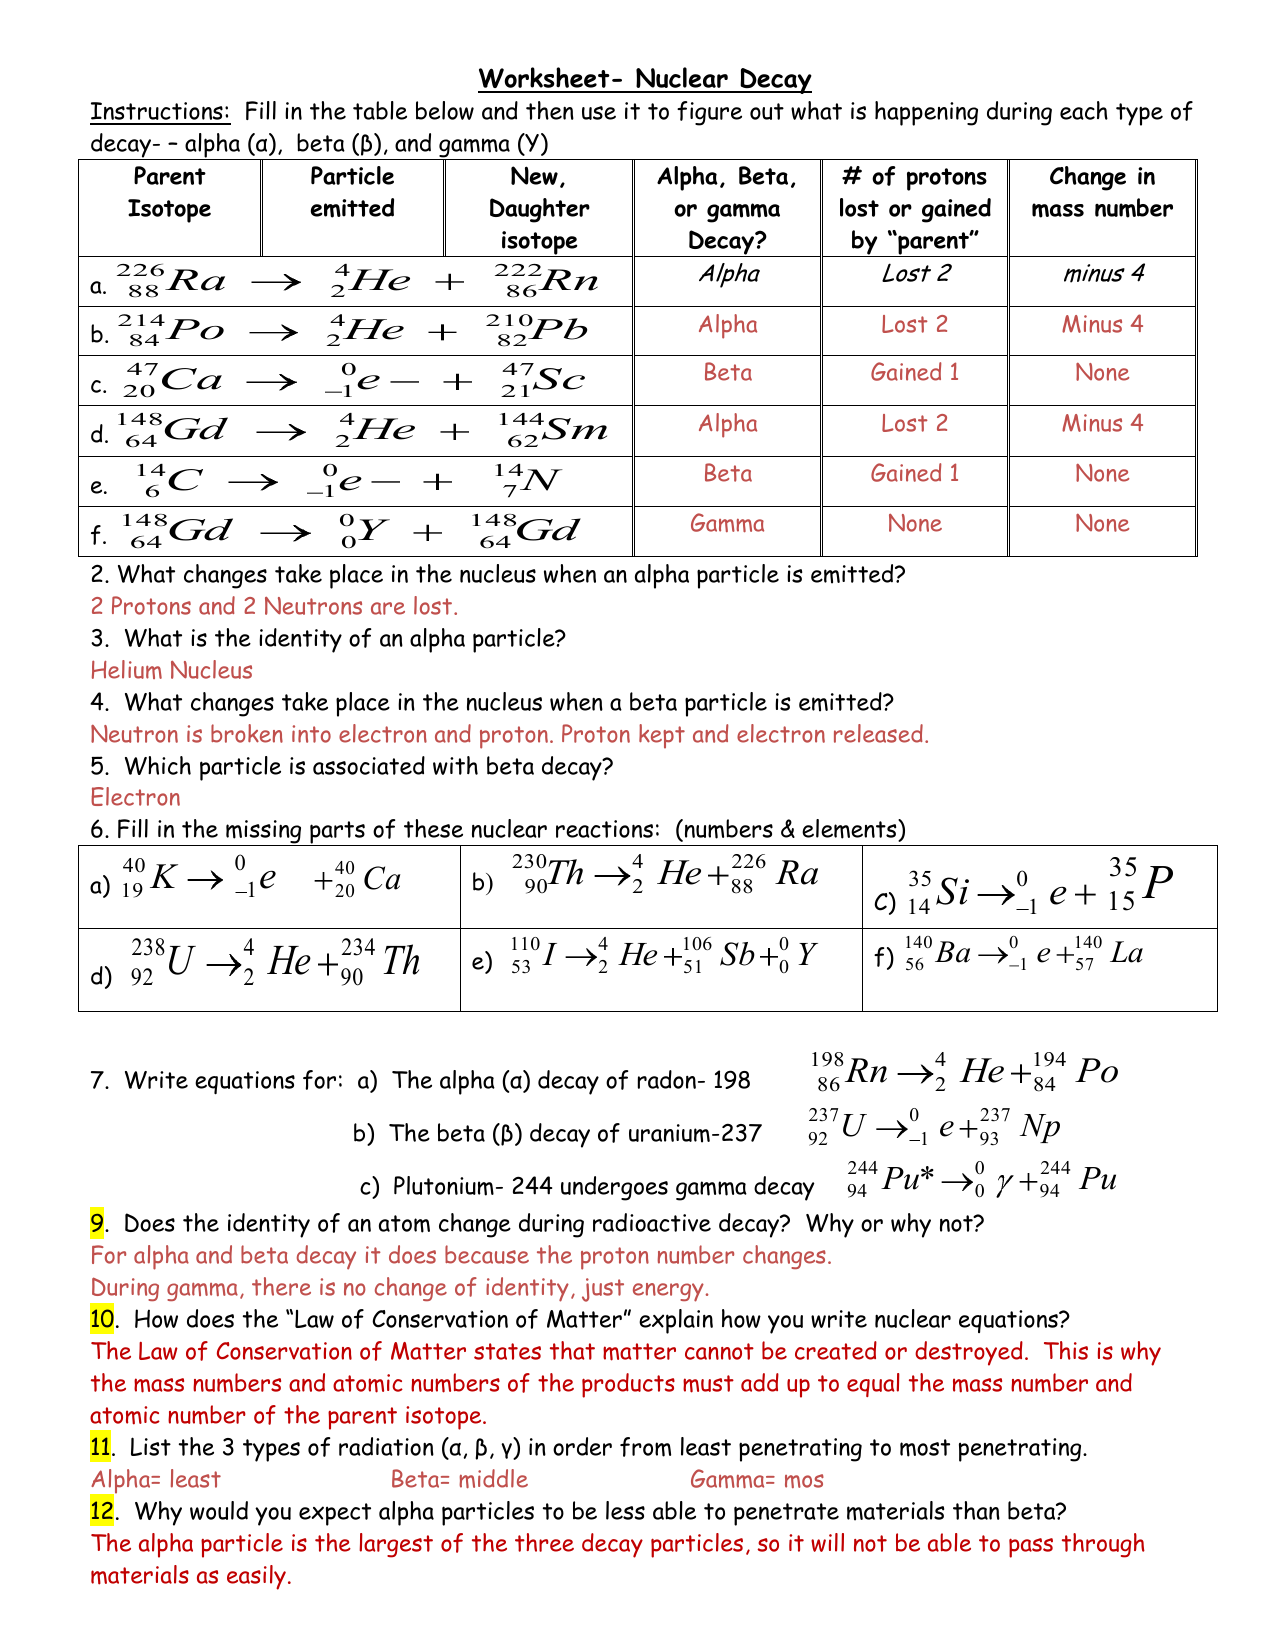 Worksheet- Nuclear Decay Intended For Nuclear Decay Worksheet Answer Key